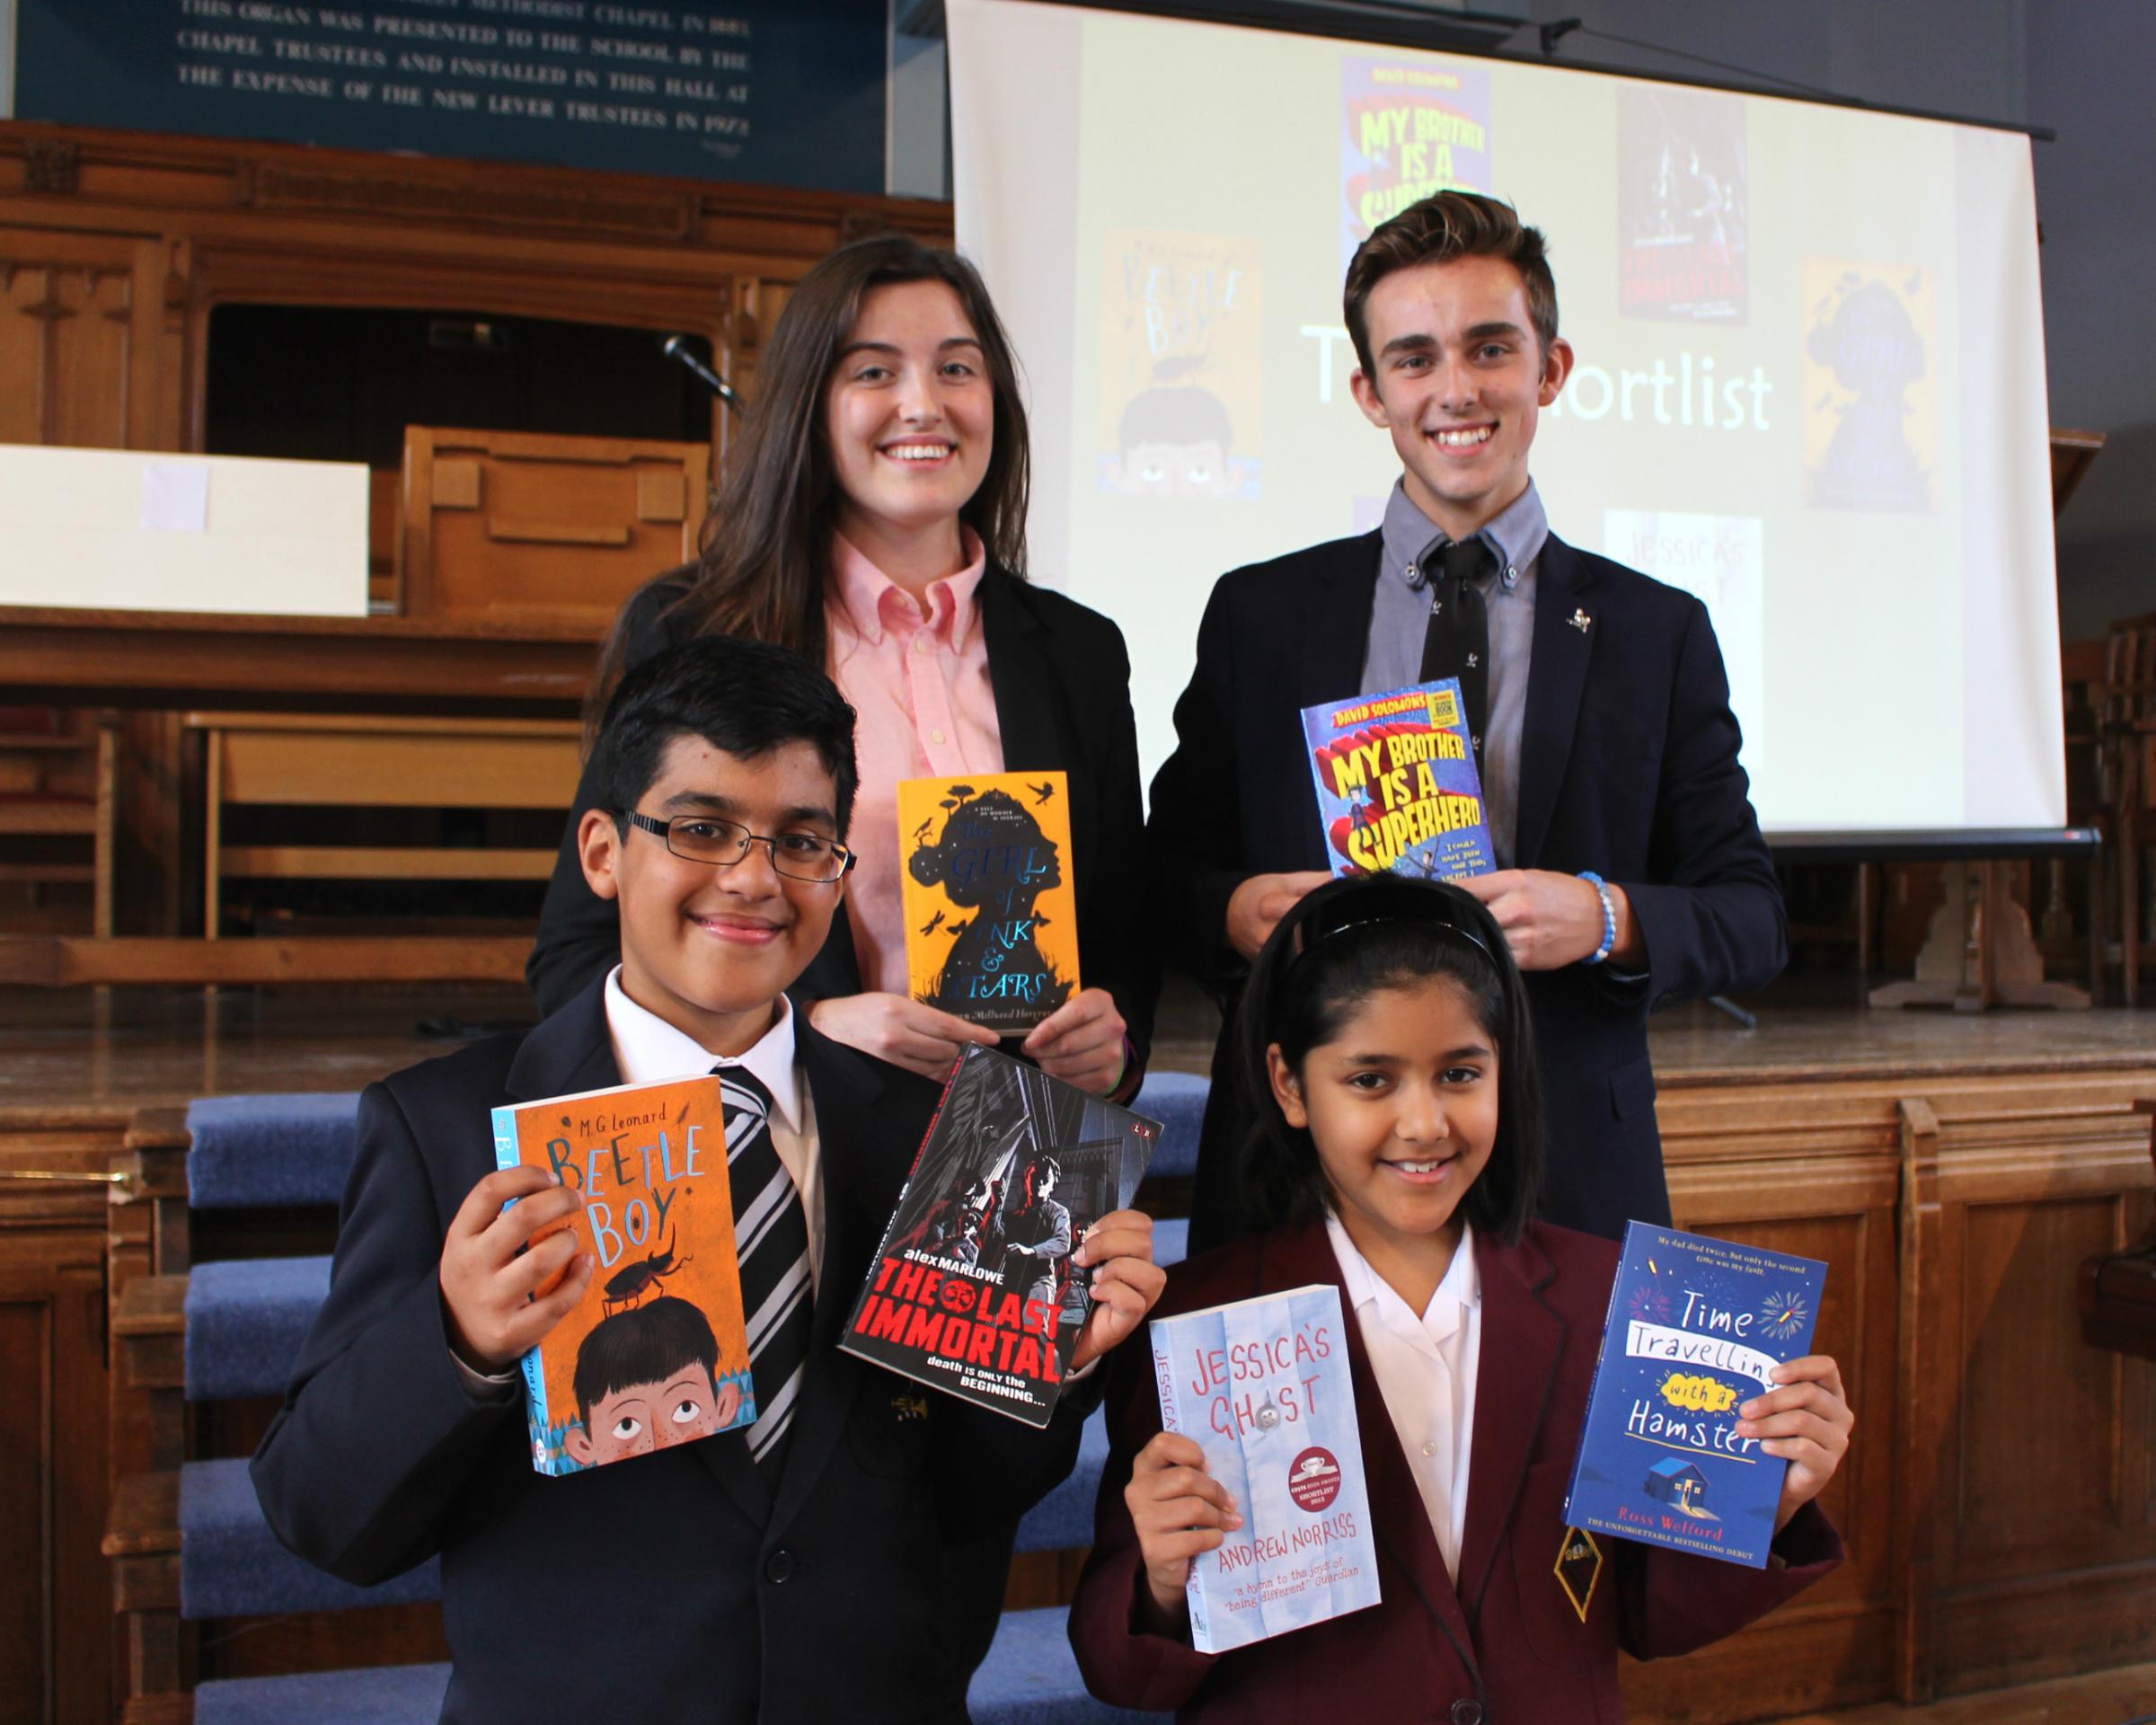 REVEALED: Shortlist published for Bolton Children's Fiction Award ... - The Bolton News